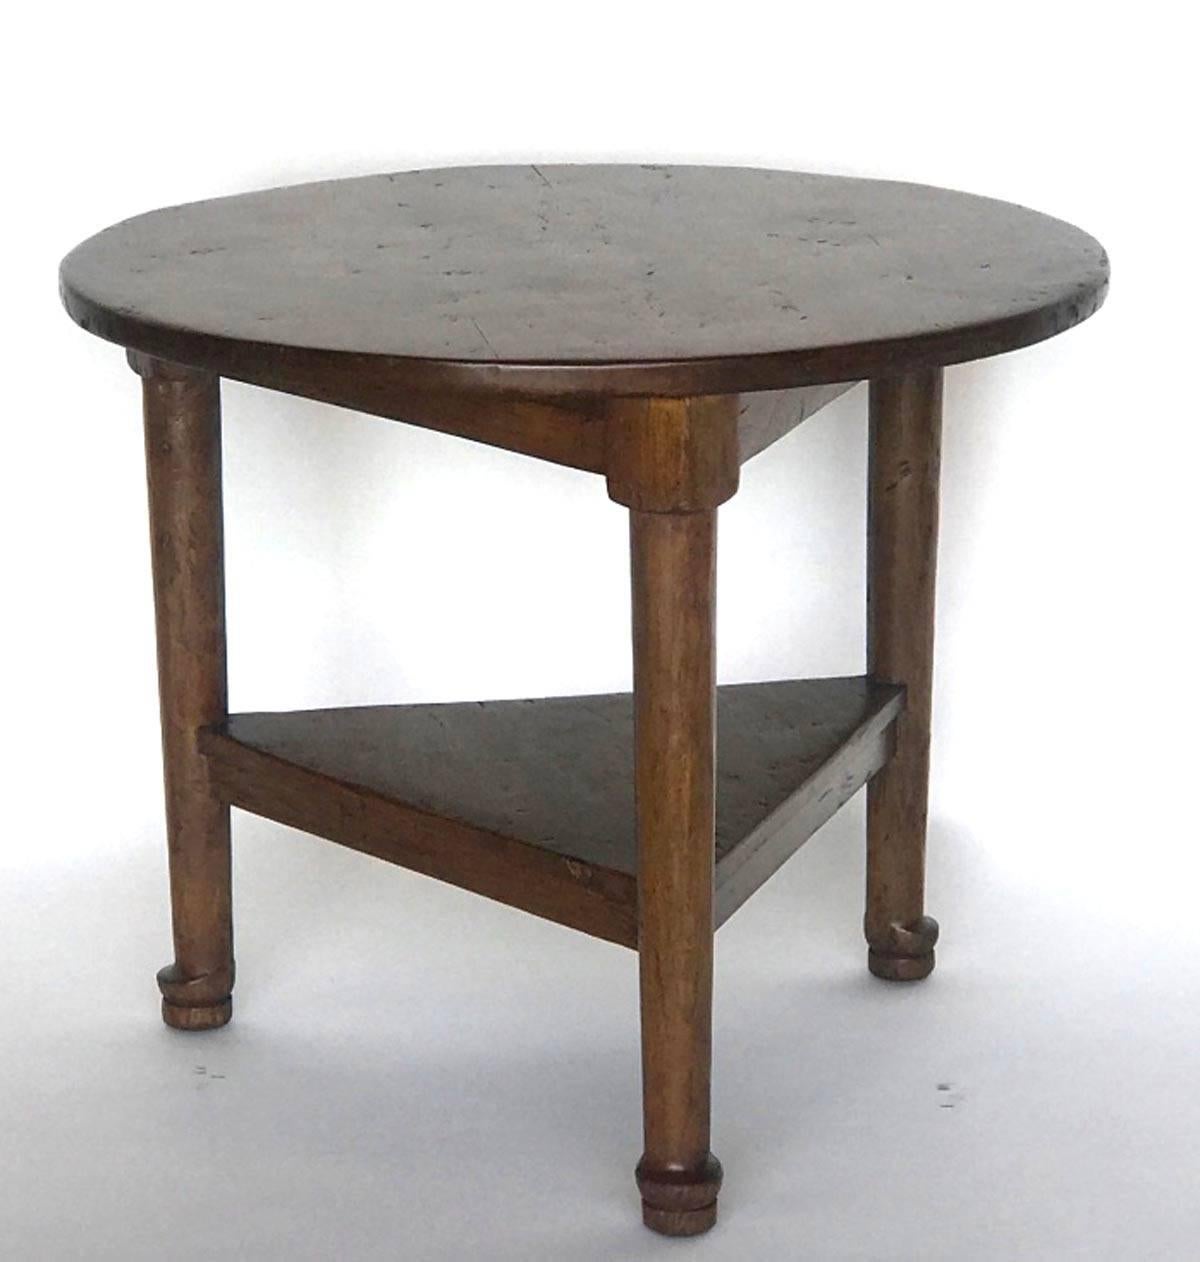 Rustic Custom Round Walnut Table with Shelf by Dos Gallos For Sale